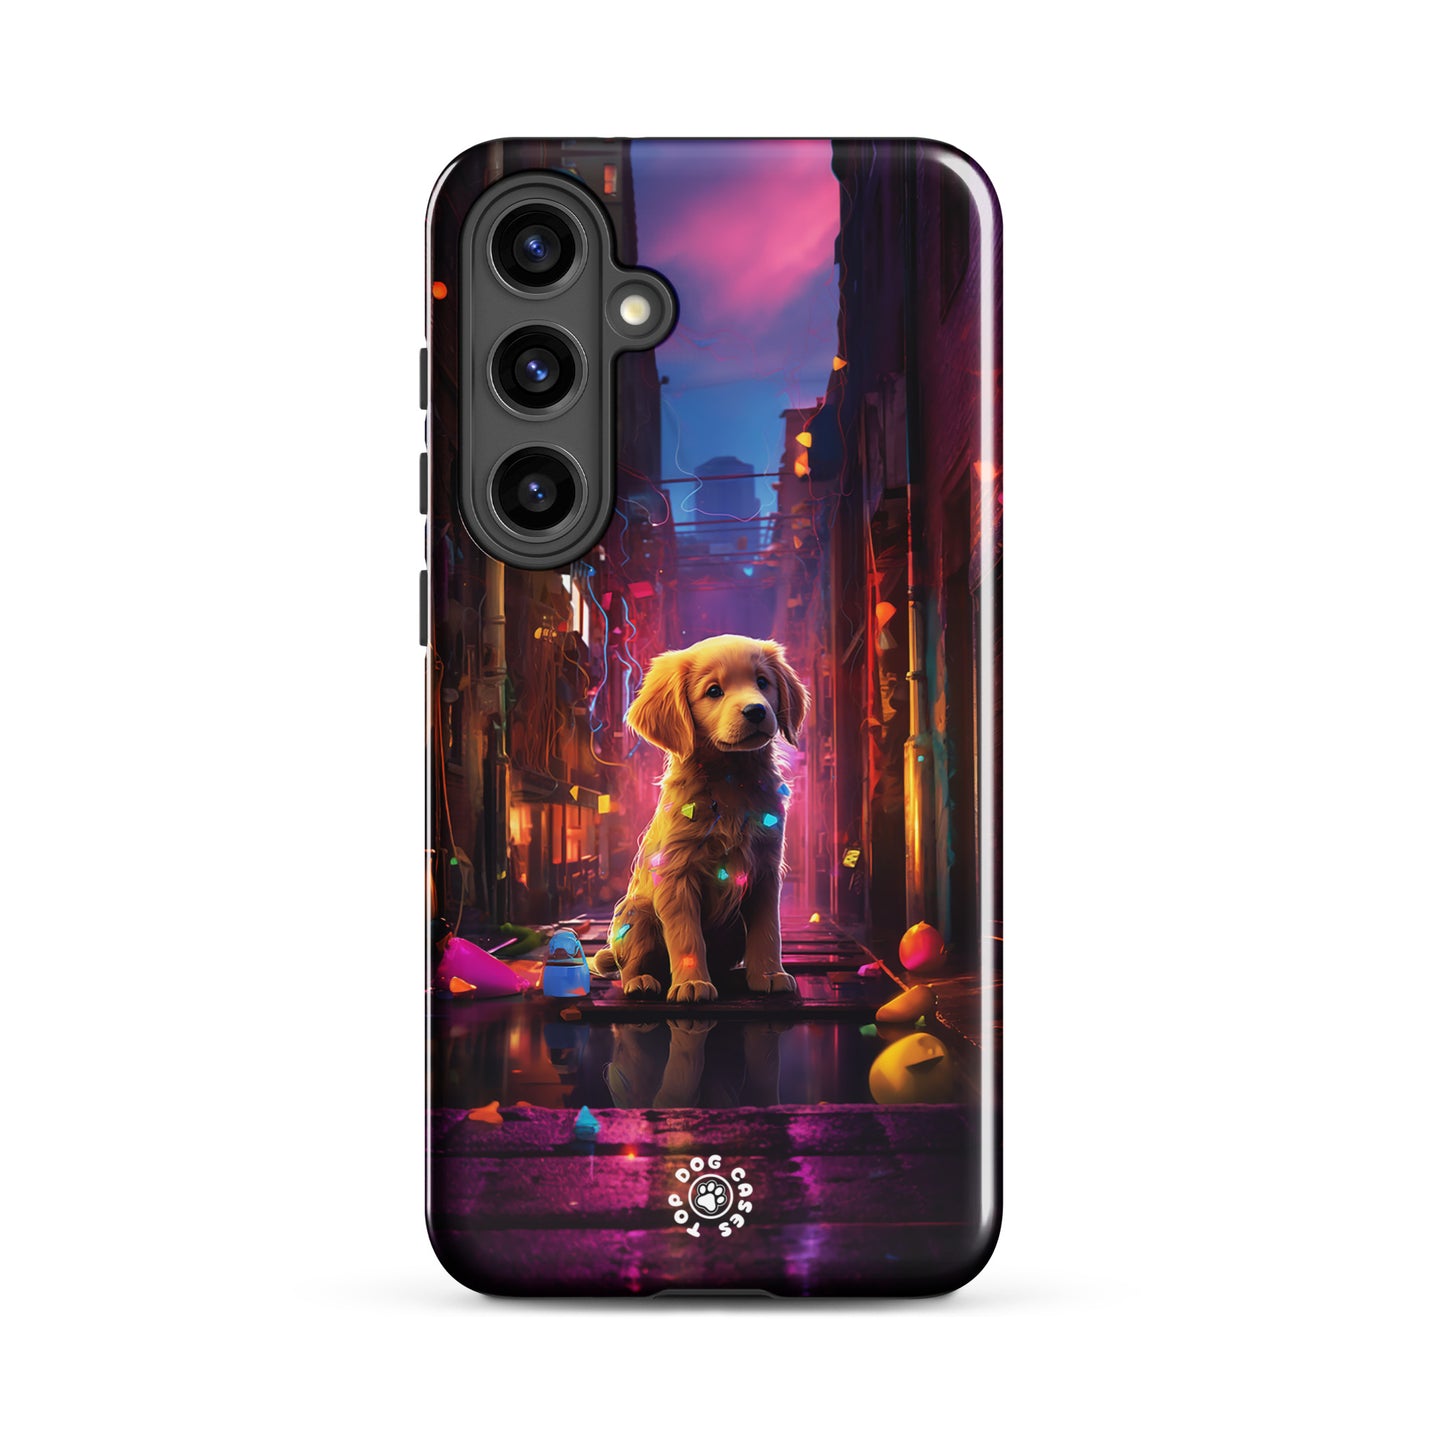 Golden Retriever in the City - Samsung Phone Case - Cute Phone Cases - Top Dog Cases - #CyberpunkCityDog, #GoldenRetriever, #SamsungGalaxyCase, #SamsungGalaxyS20, #SamsungGalaxyS21, #SamsungGalaxyS22, #SamsungGalaxyS22Ultra, #SamsungGalaxyS23, #SamsungGalaxyS23Ultra